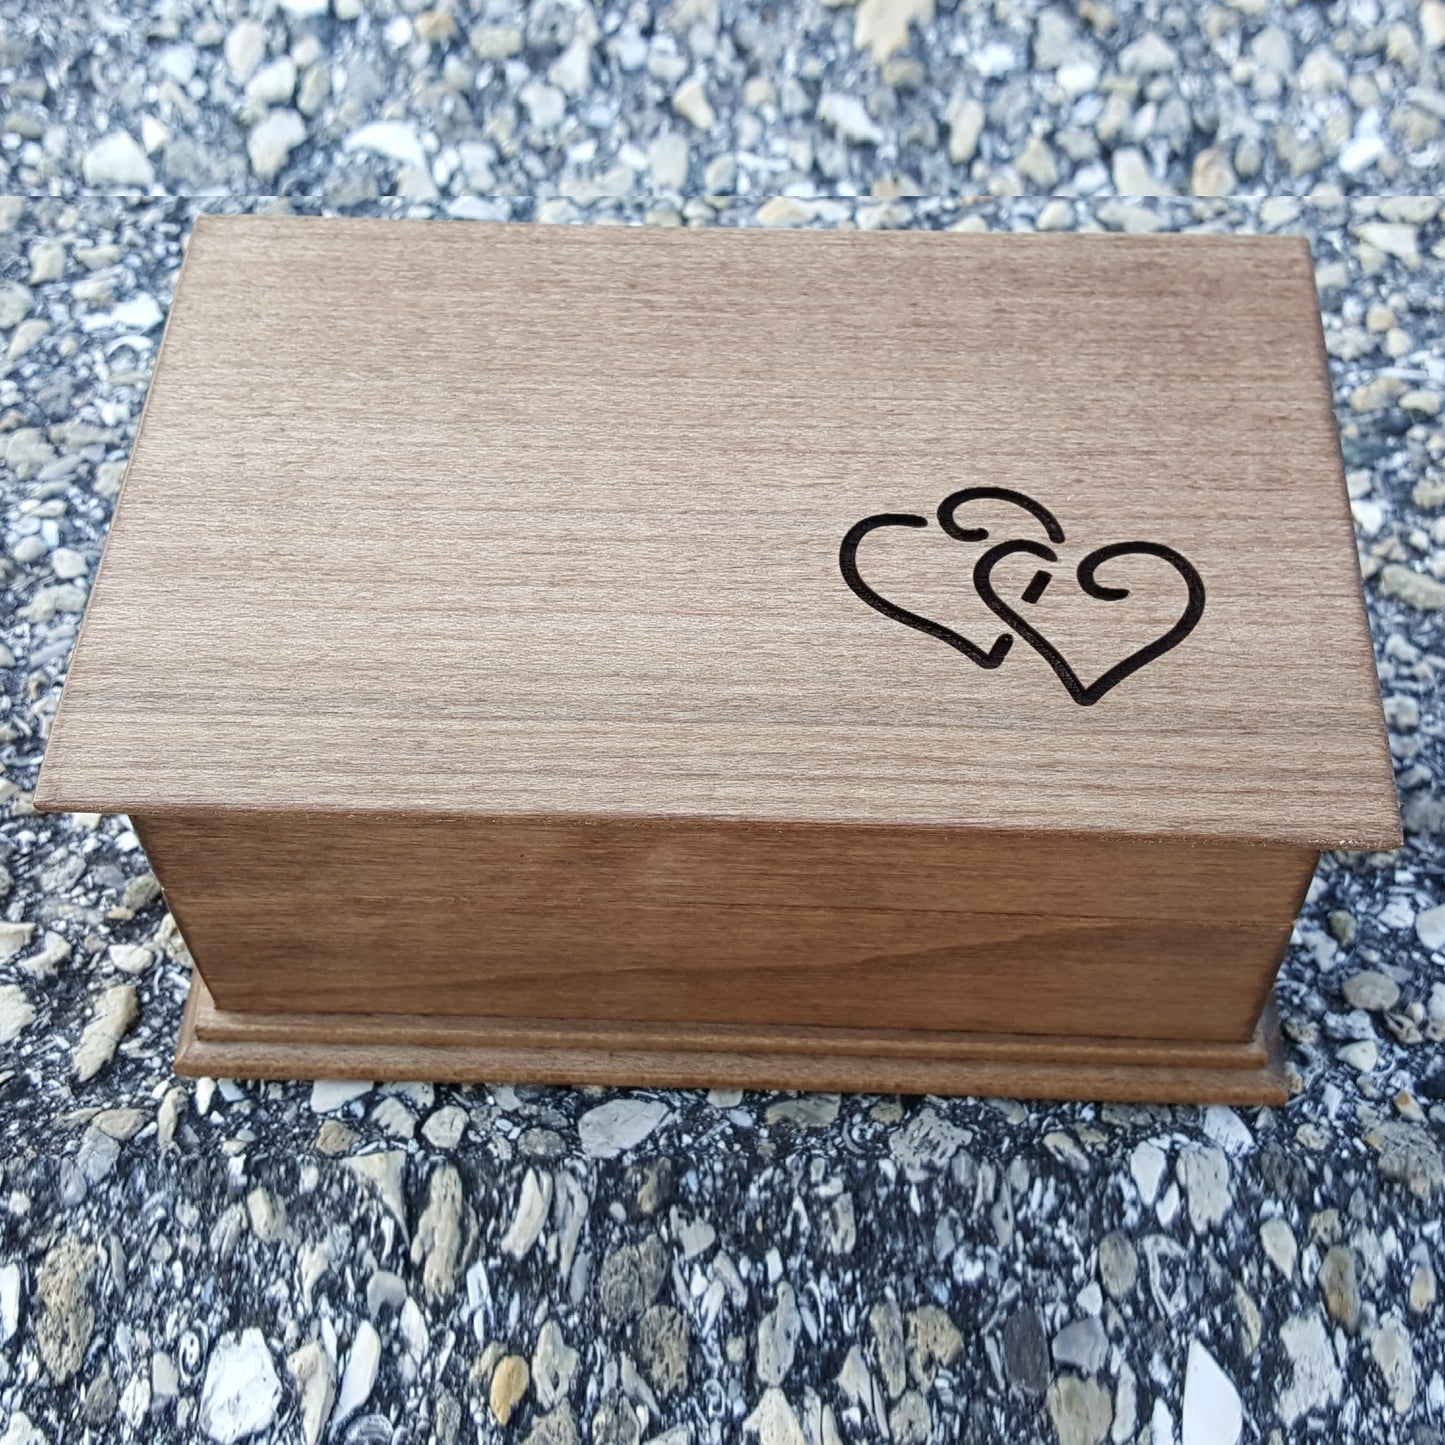 wood jewelry box with intertwined hearts engraved in the corner, choose color and song add personalization